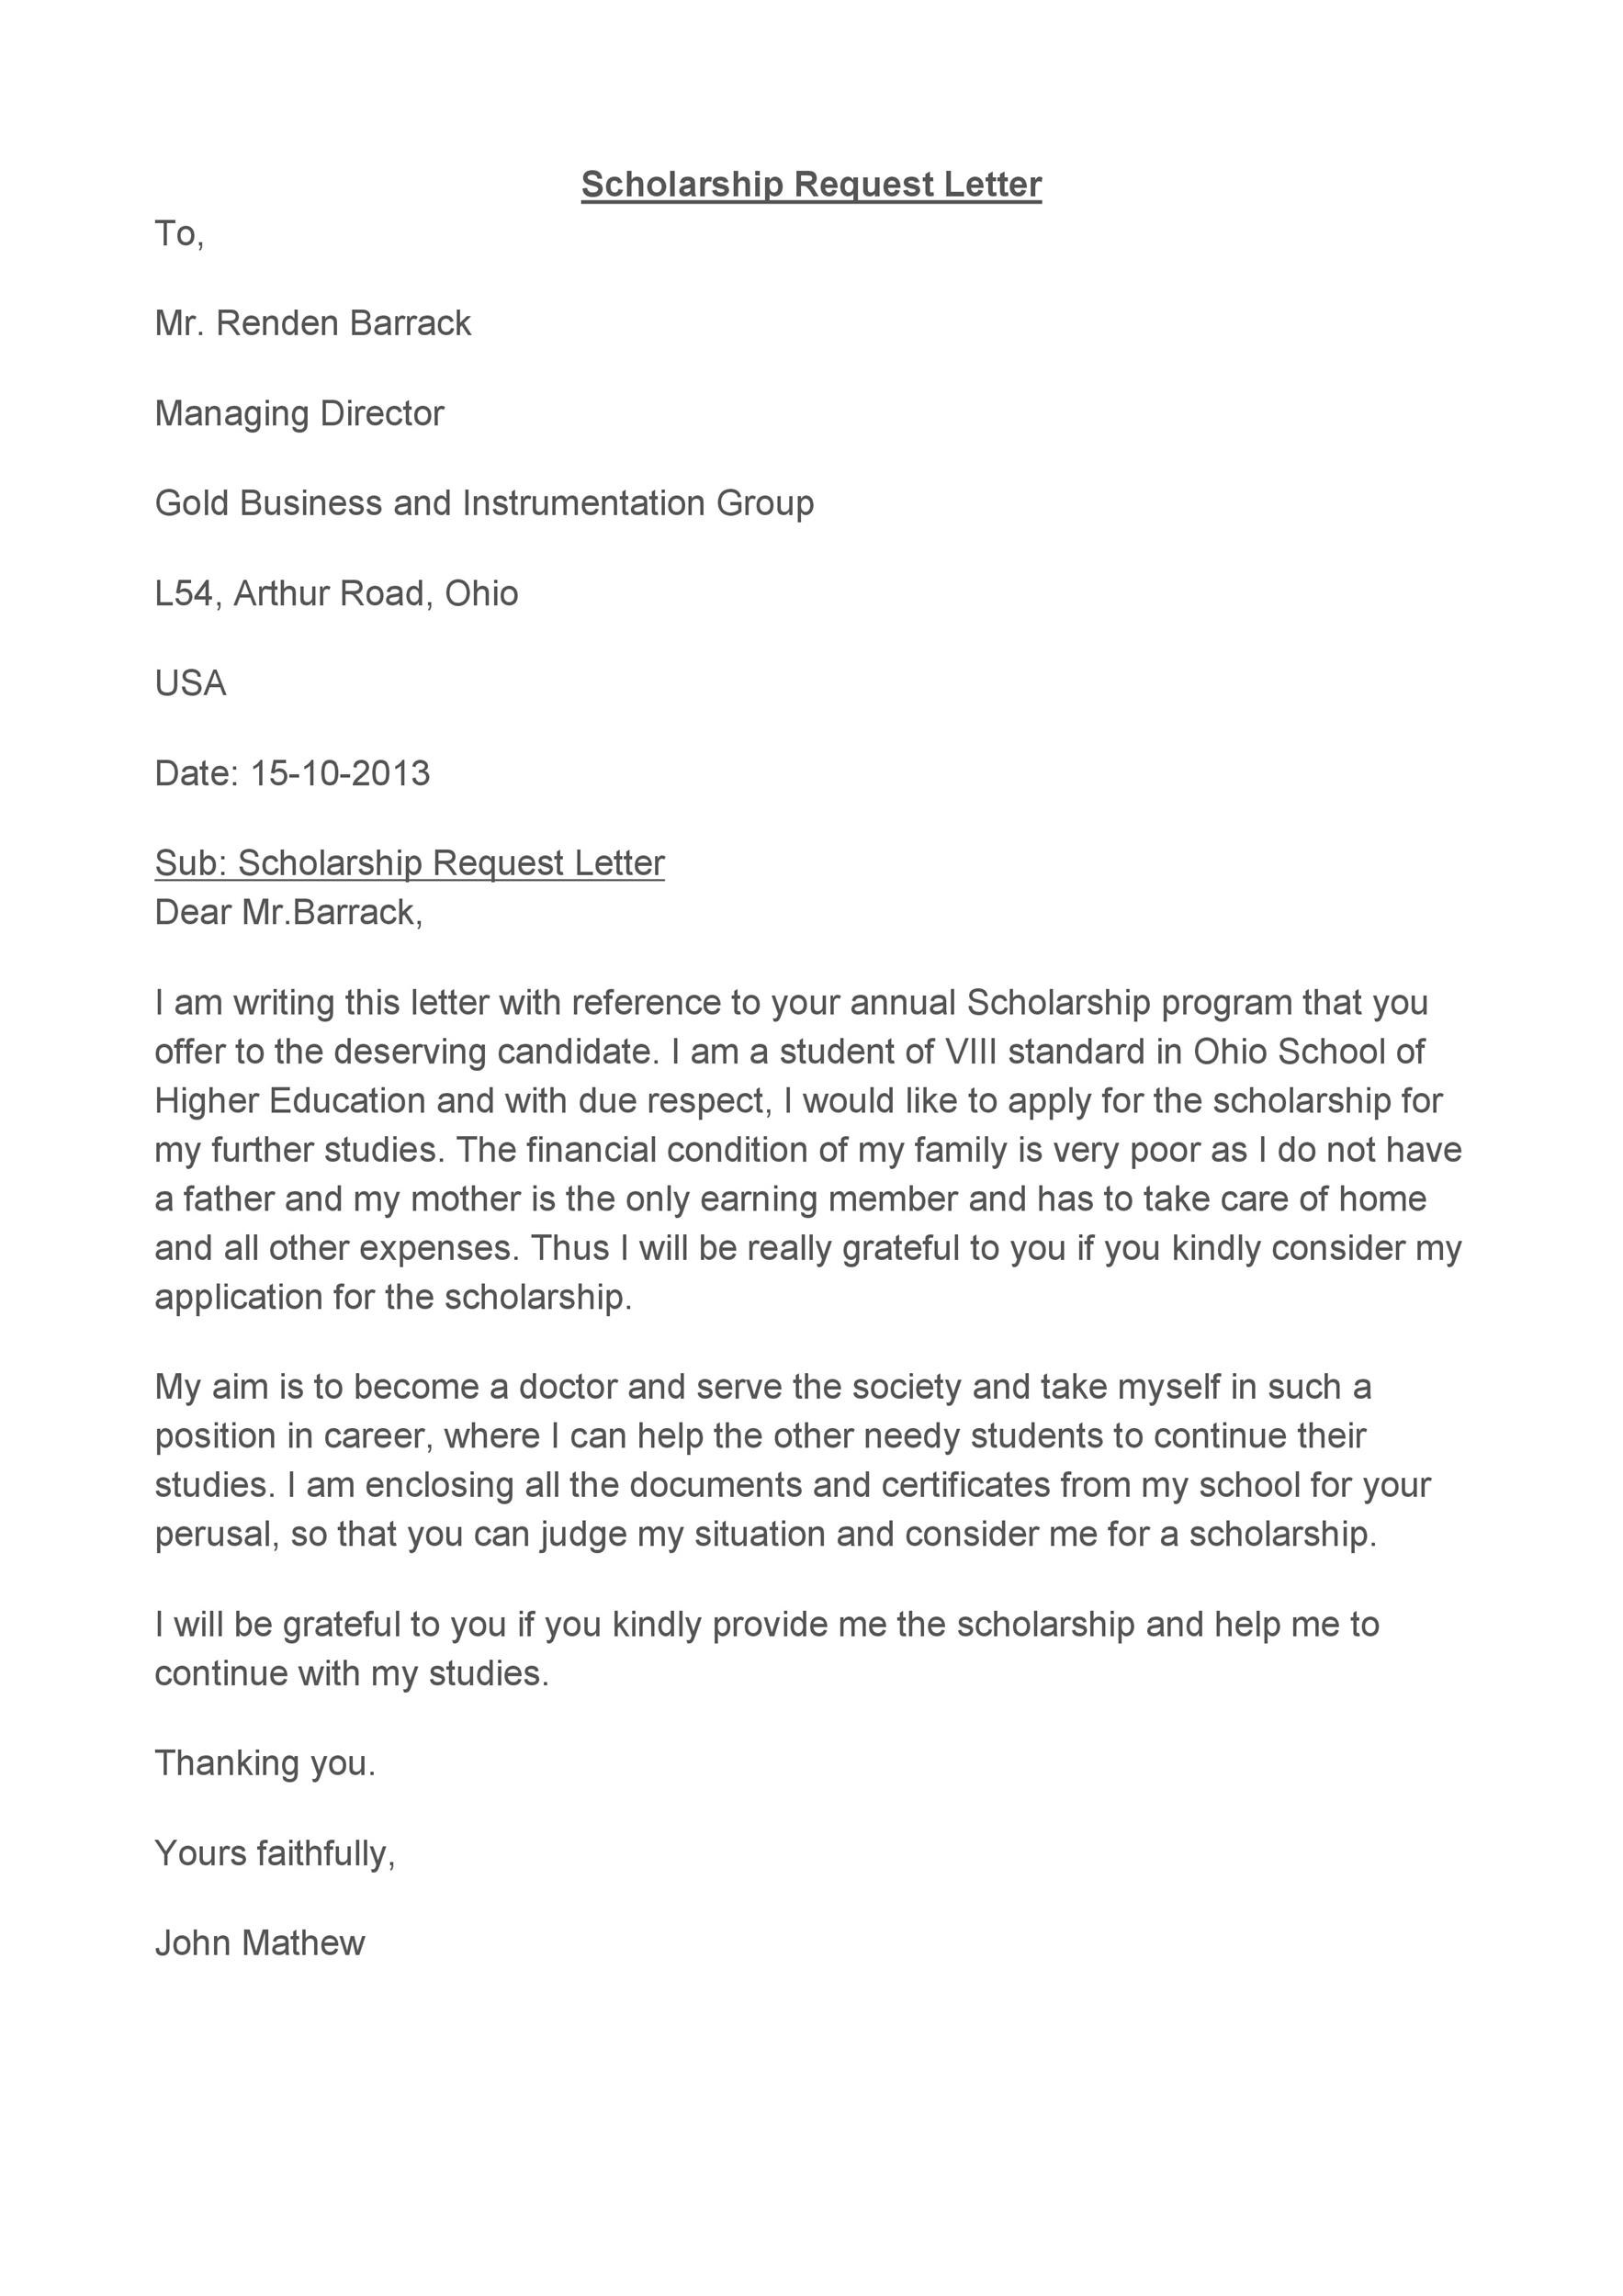 How to write an application letter for a phd